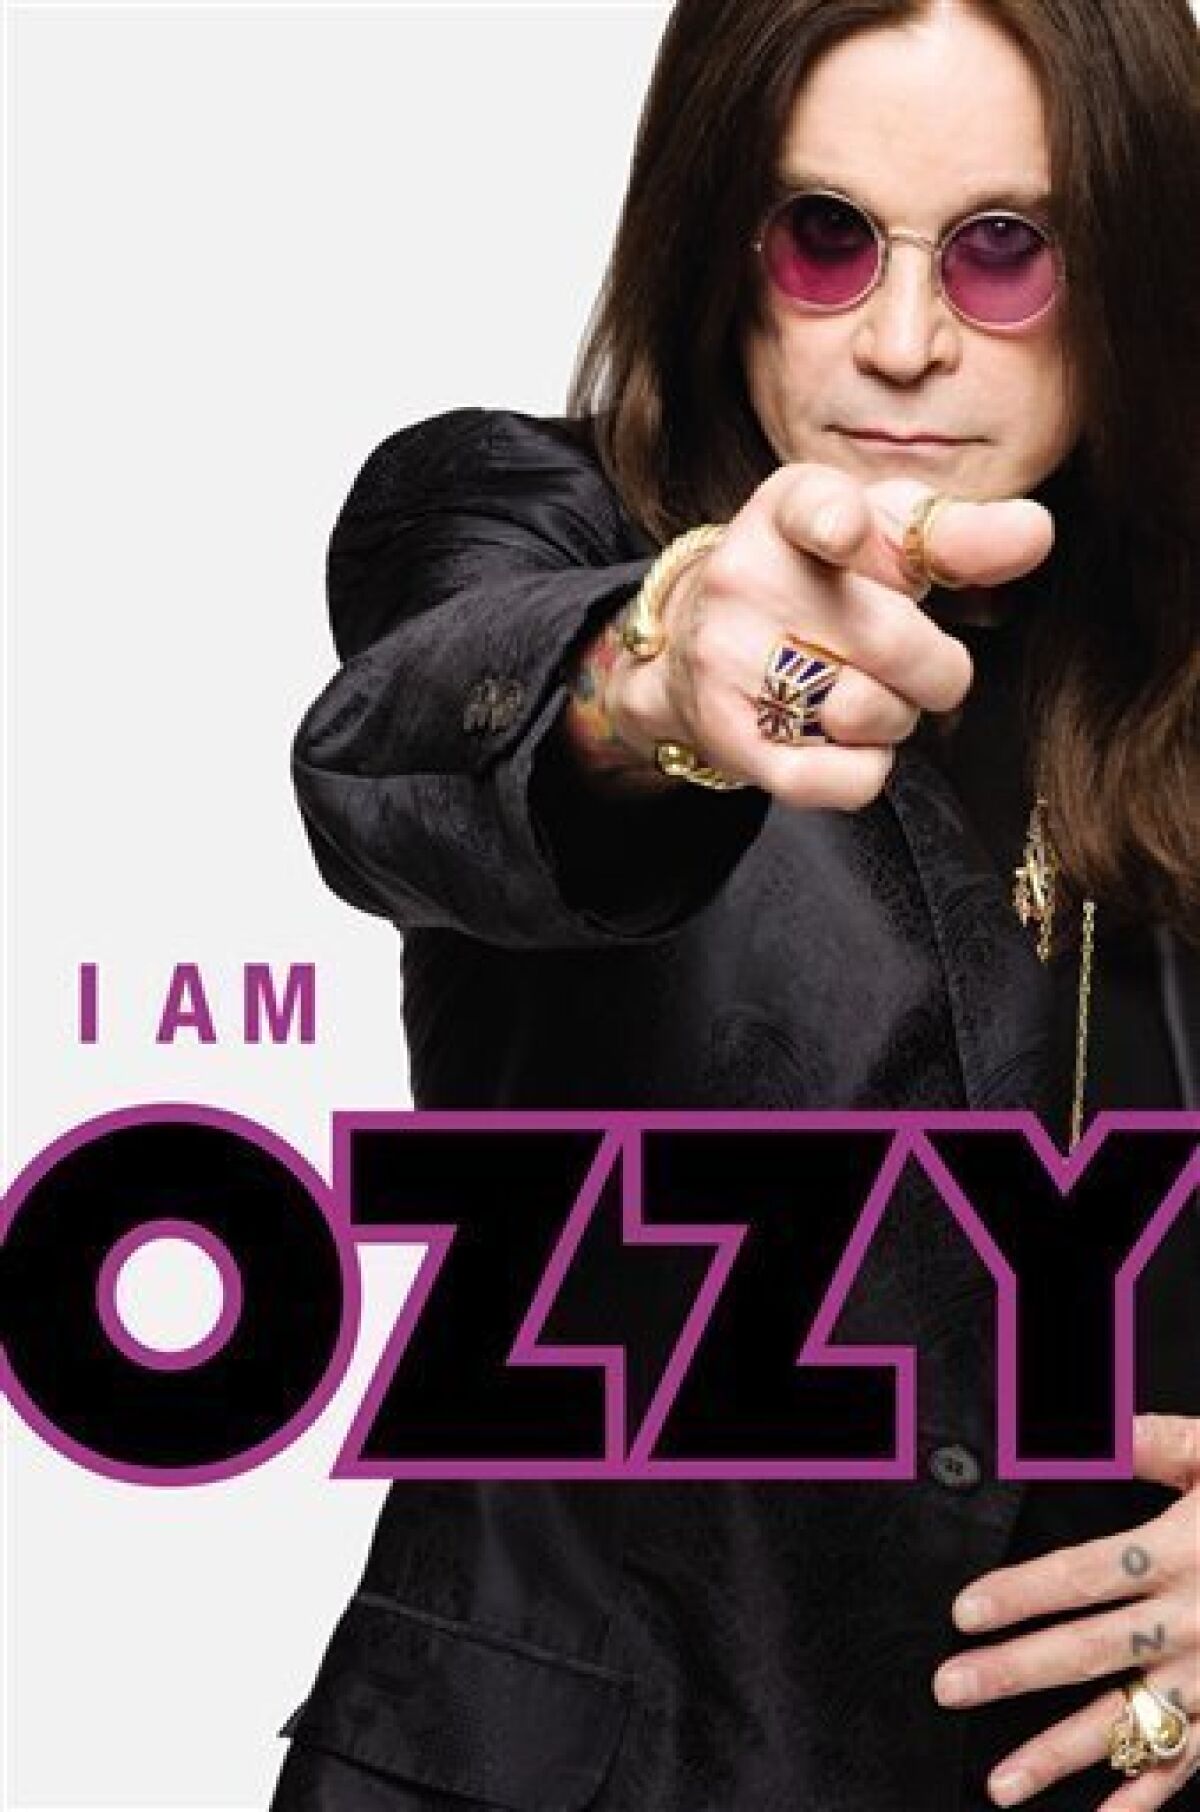 In this book cover image released by Grand Central Publishing, Ozzy osborne's "I am Ozzy," is shown. (AP Photo/Grand Central Publishing)